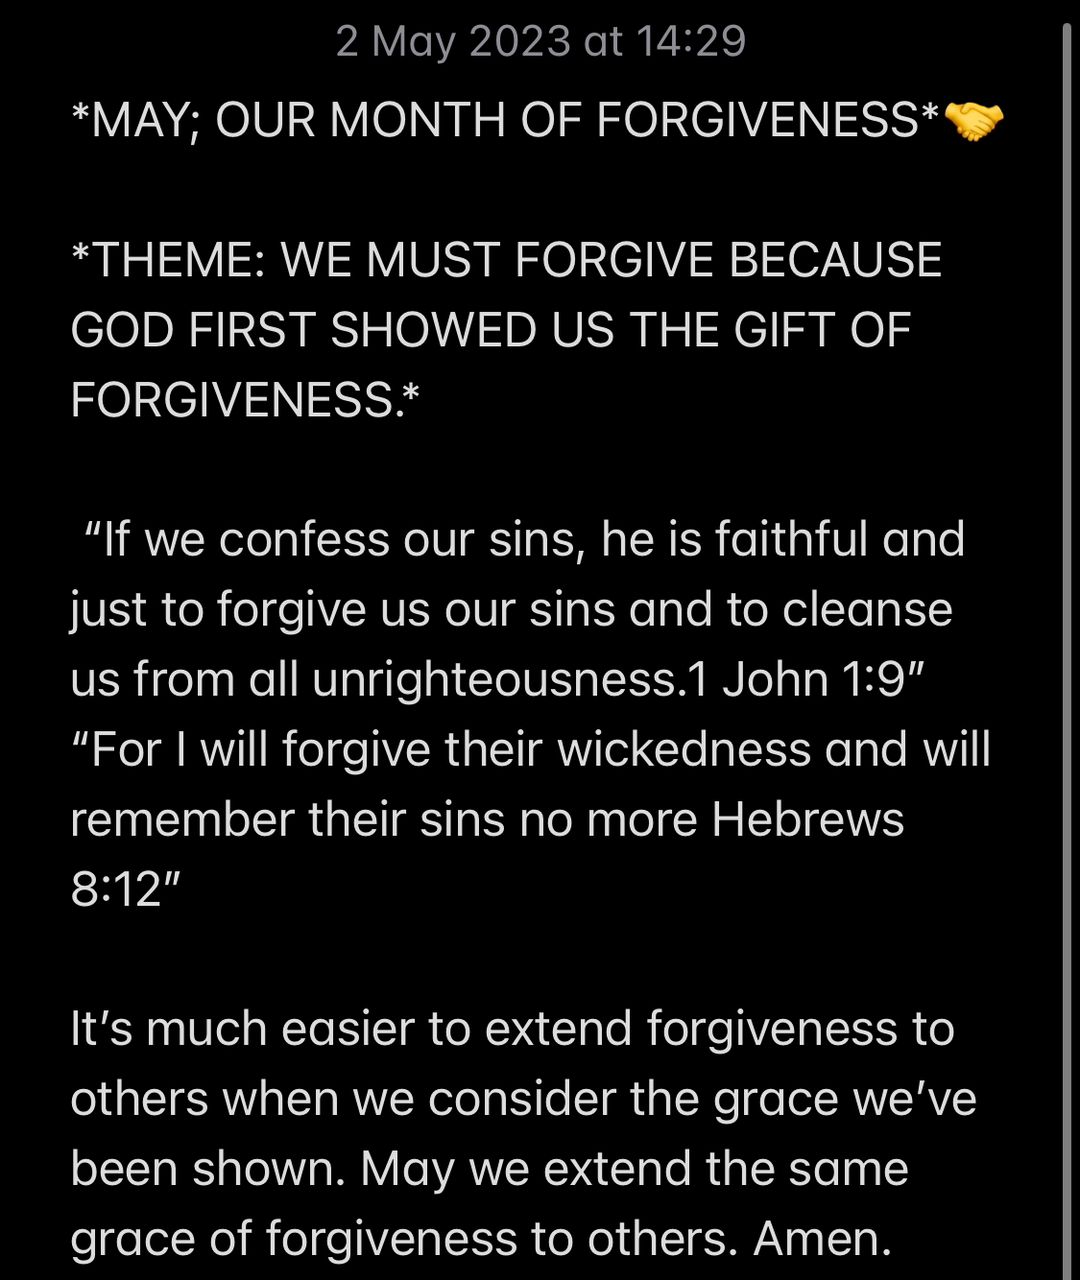 MAY OUR MONTH OF FORGIVENESS